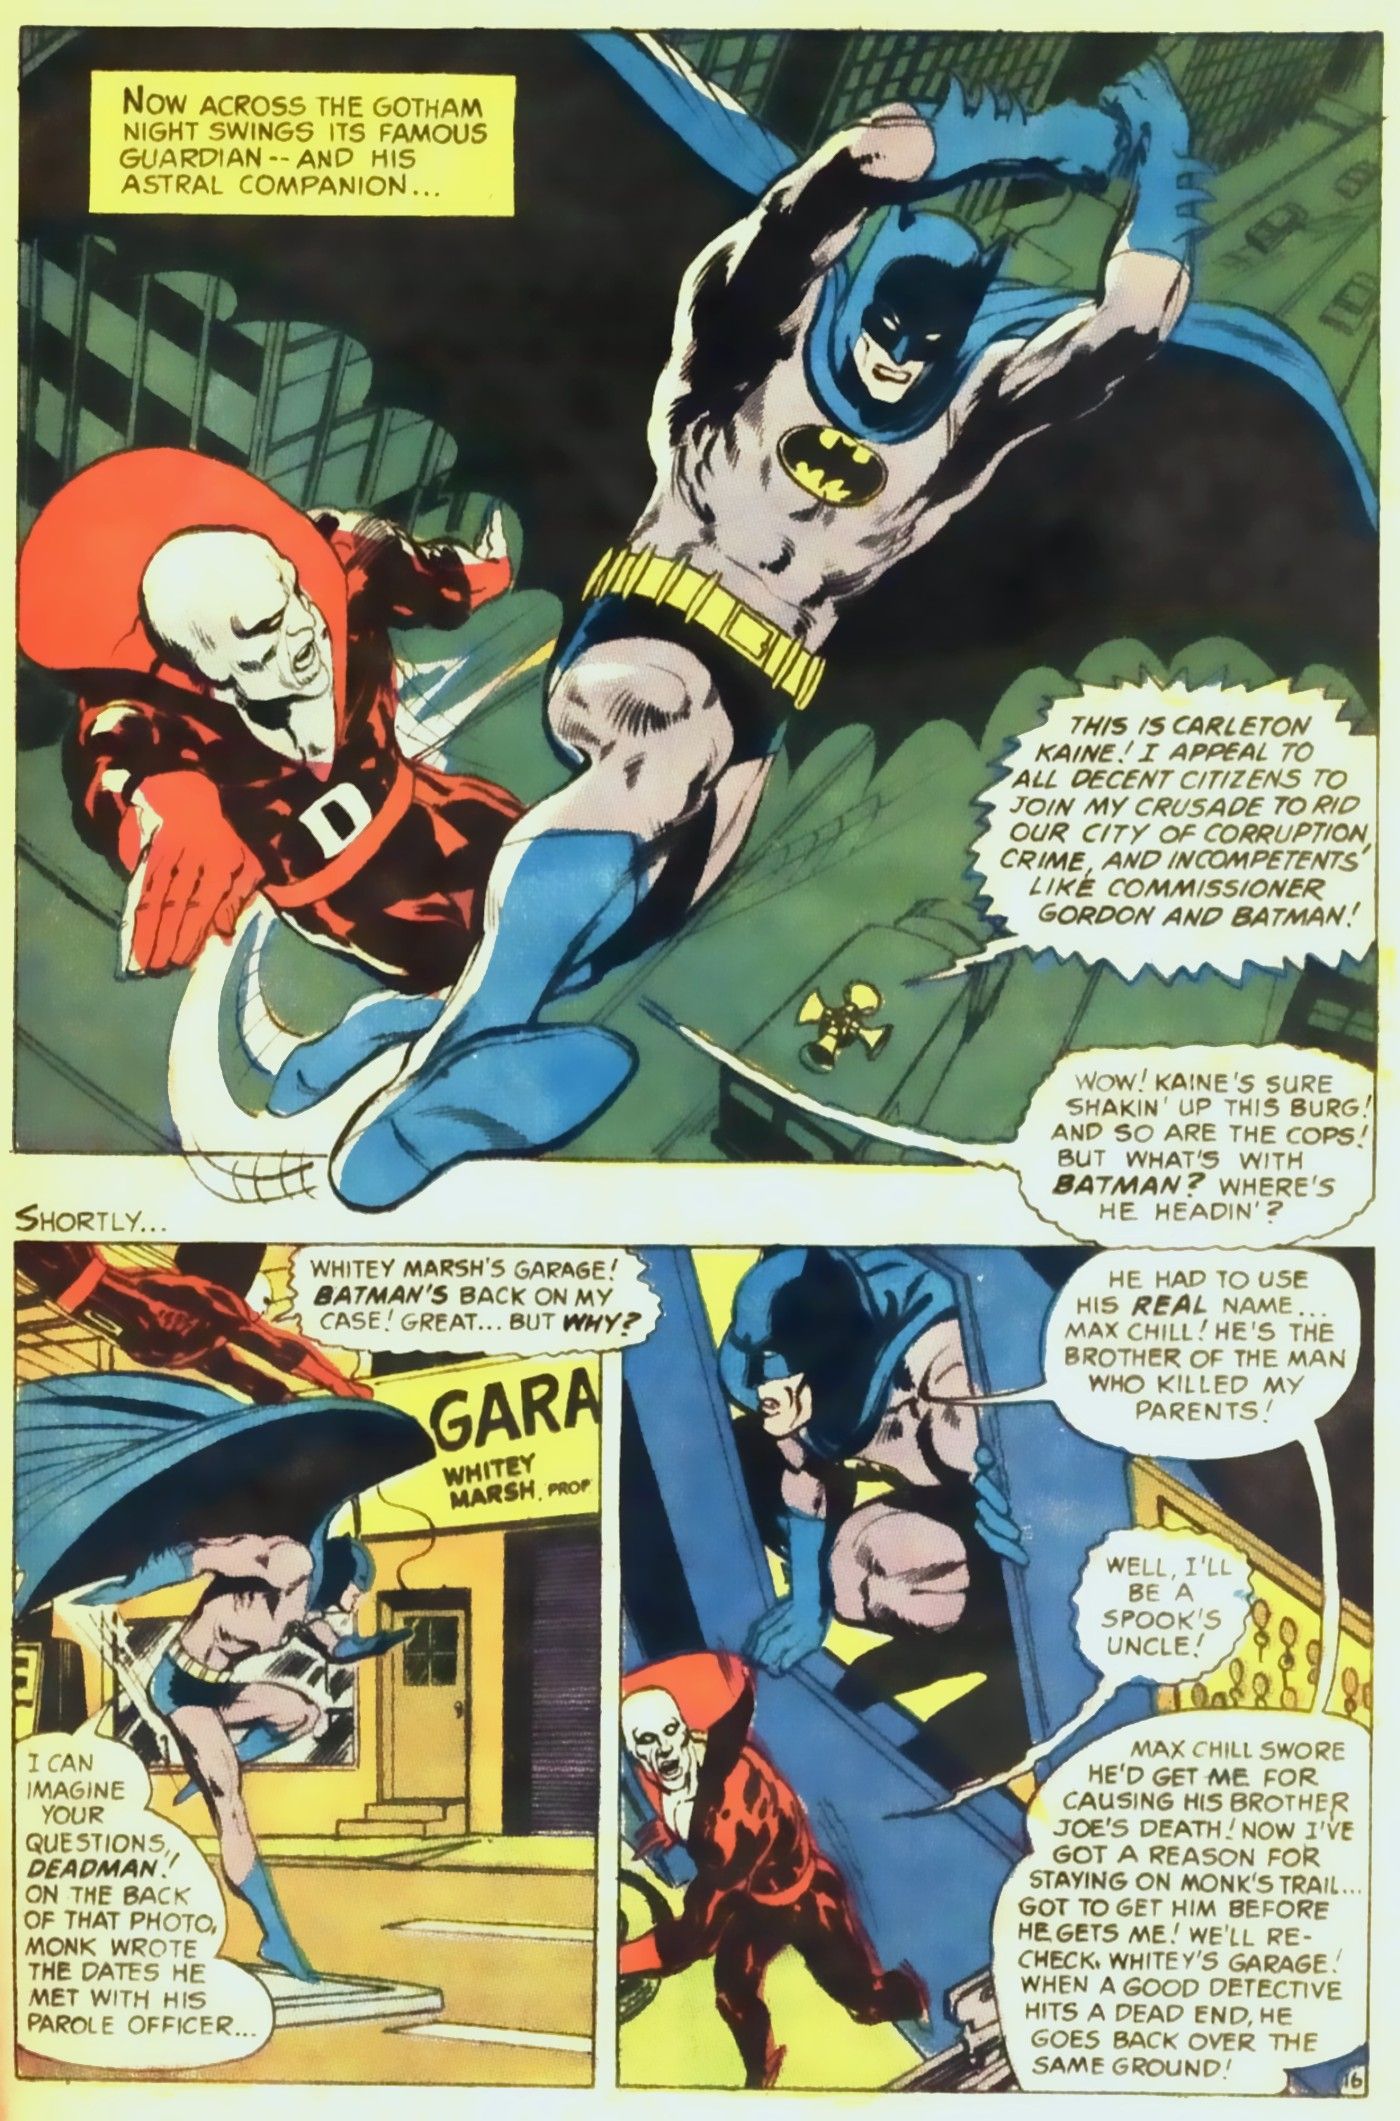 The Modern Idea of ‘Batman’ Only Exists Because He Teamed Up With Deadman